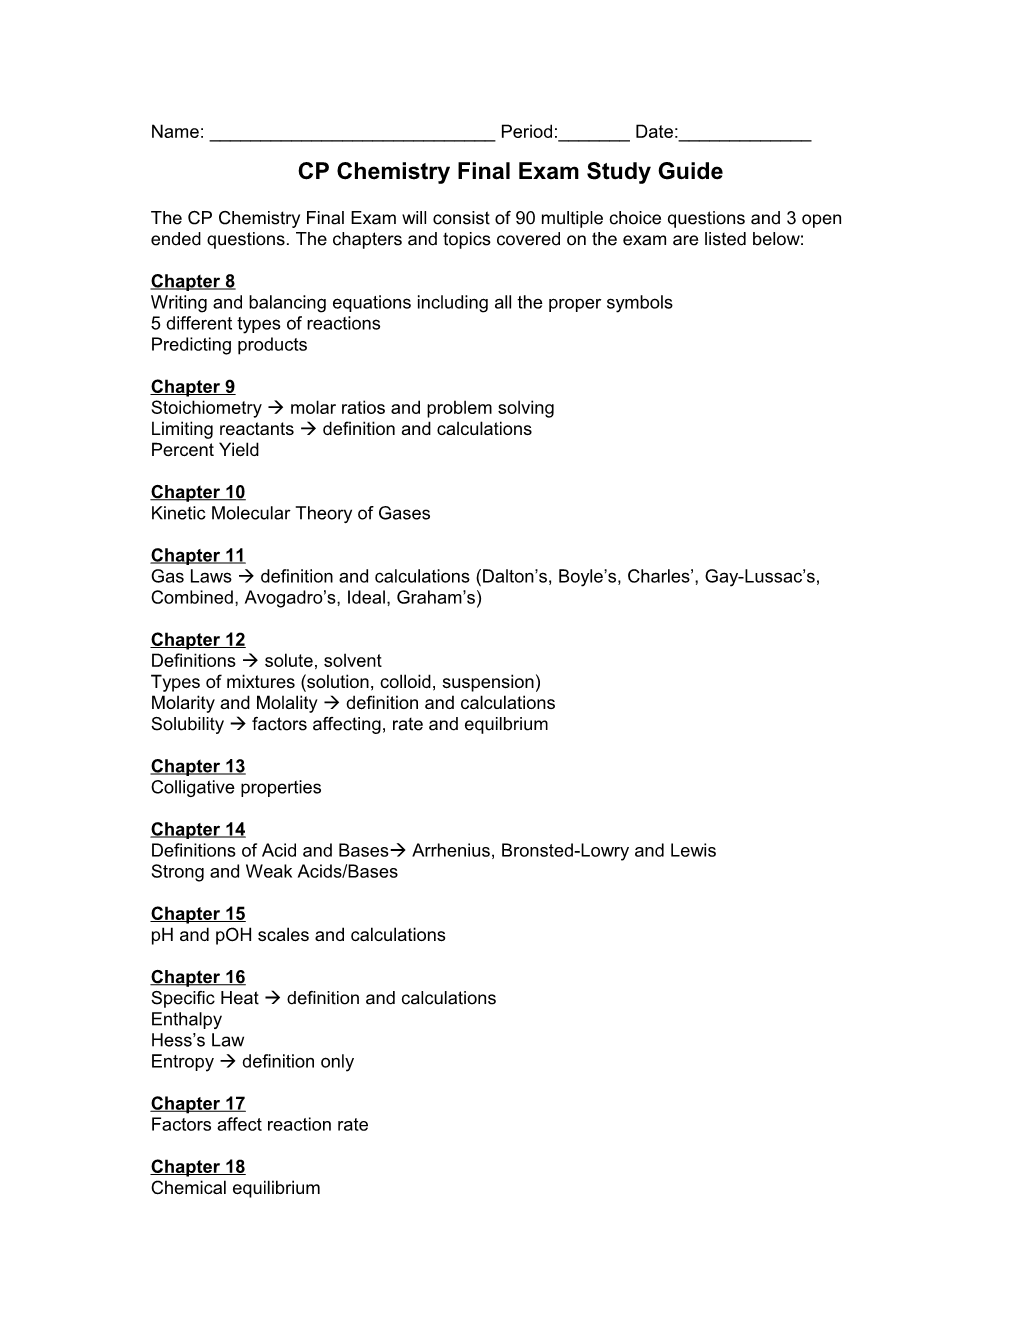 CP Chemistry Final Exam Study Guide